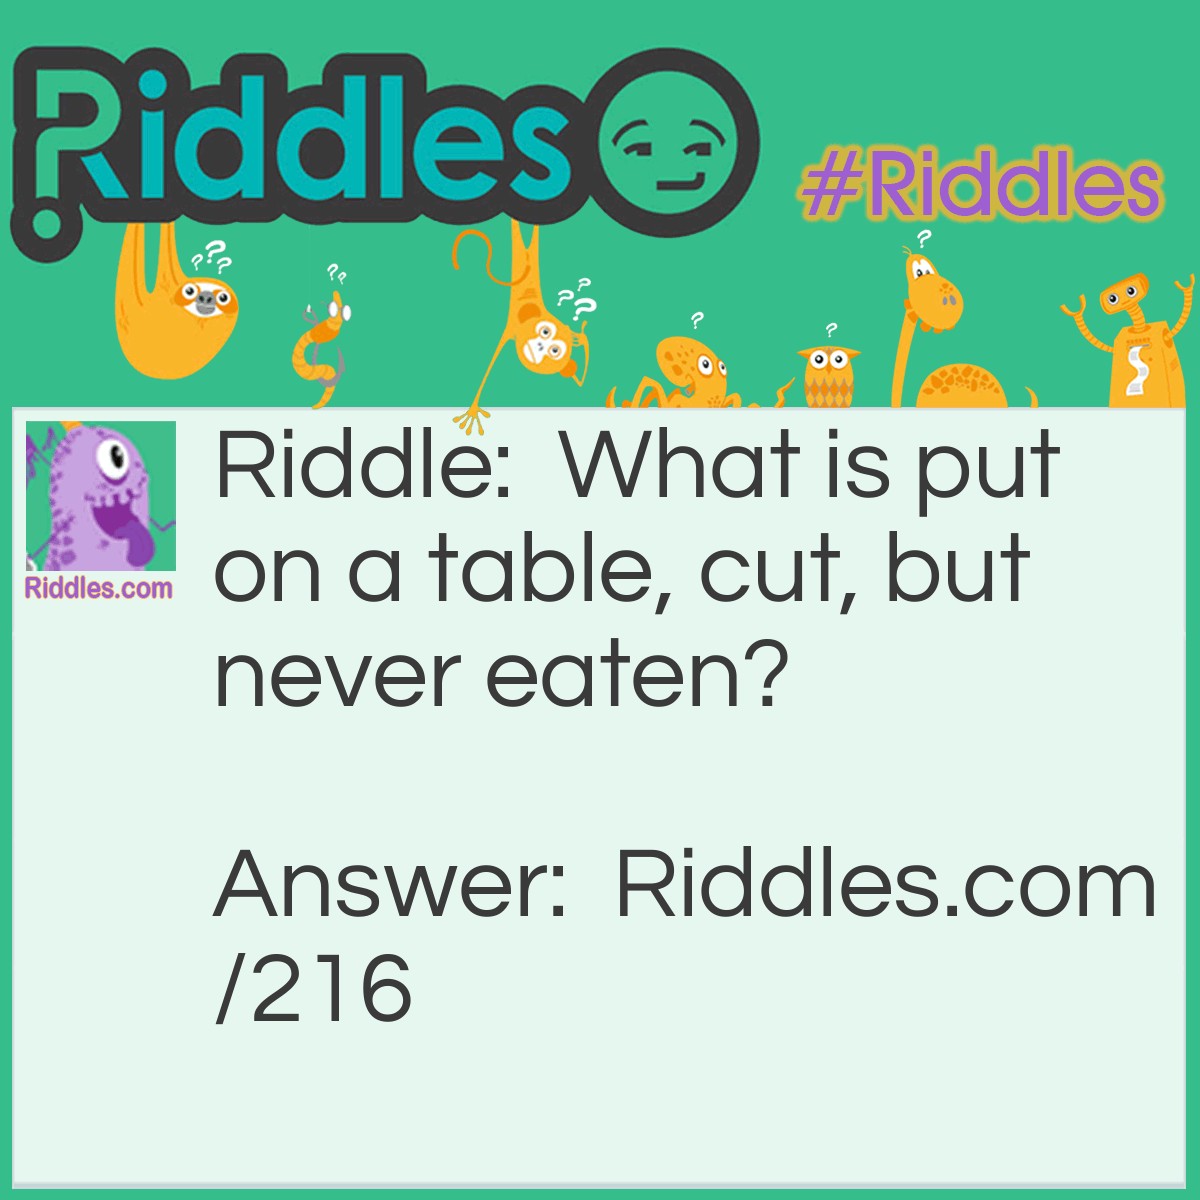 Riddle: What is put on a table, cut, but never eaten? Answer: A deck of cards.